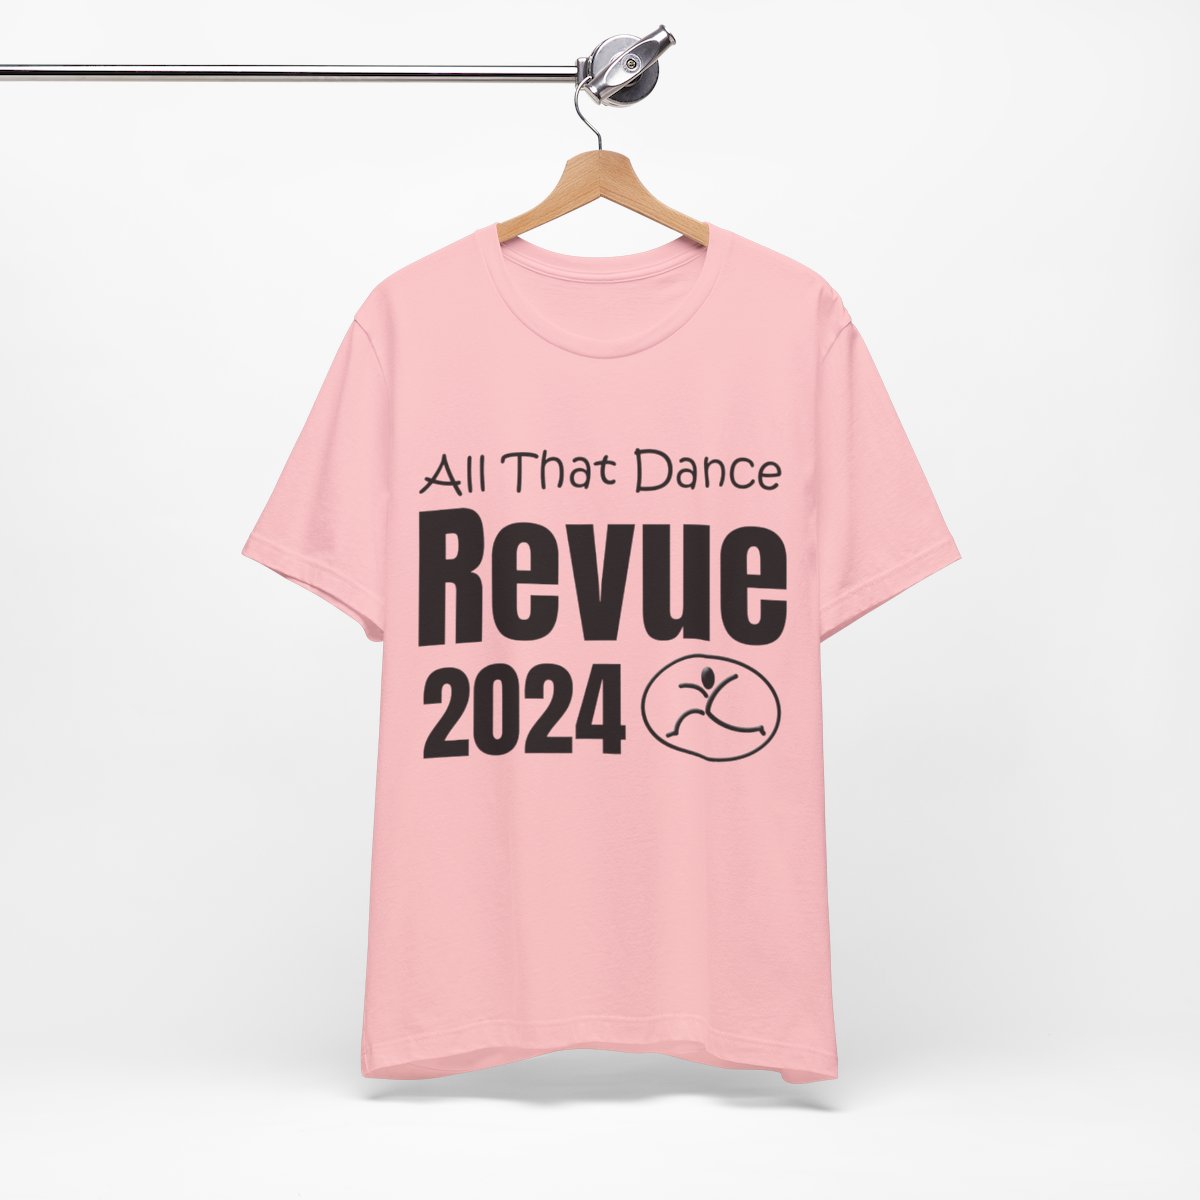 Adult Sizes - All That Dance Revue 2024 Tshirt product thumbnail image